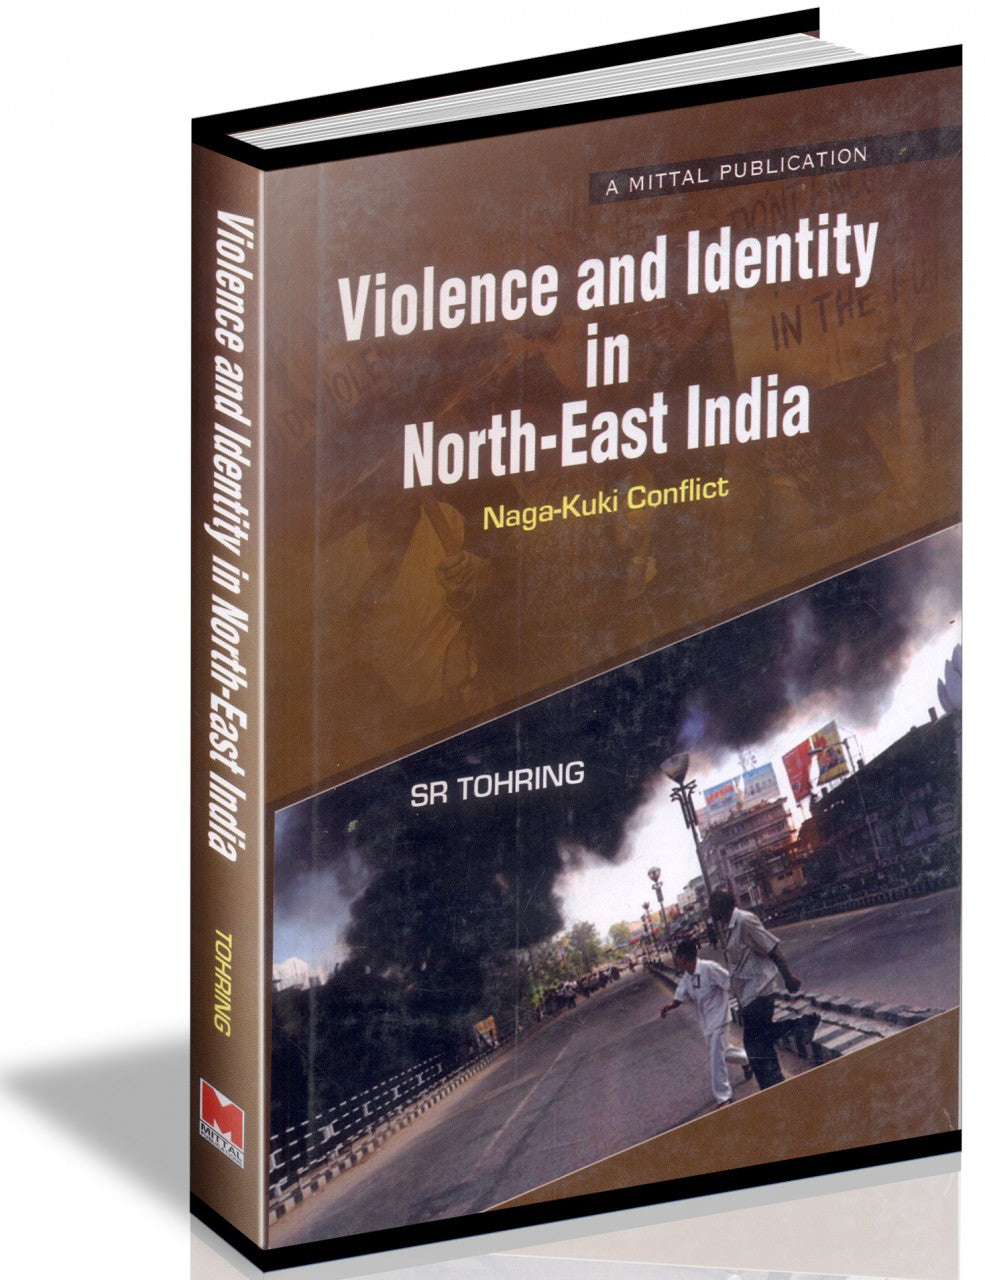 Violence and Idenity in North-East India